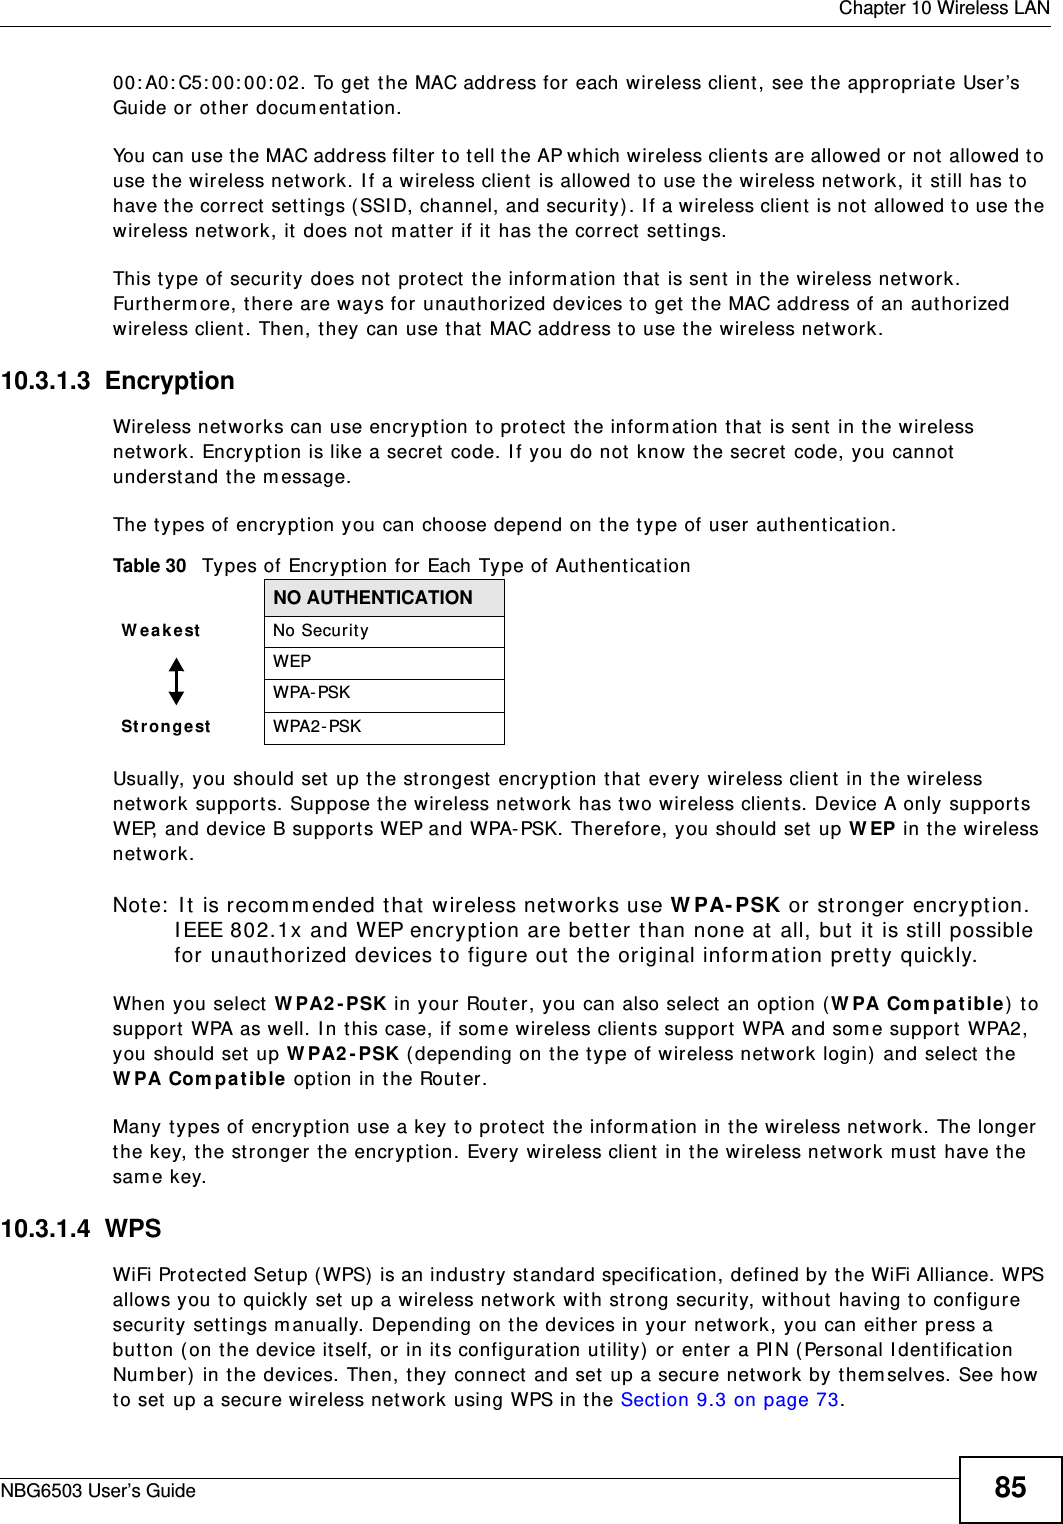  Chapter 10 Wireless LANNBG6503 User’s Guide 8500:A0:C5:00:00:02. To get the MAC address for each wireless client, see the appropriate User’s Guide or other documentation.You can use the MAC address filter to tell the AP which wireless clients are allowed or not allowed to use the wireless network. If a wireless client is allowed to use the wireless network, it still has to have the correct settings (SSID, channel, and security). If a wireless client is not allowed to use the wireless network, it does not matter if it has the correct settings.This type of security does not protect the information that is sent in the wireless network. Furthermore, there are ways for unauthorized devices to get the MAC address of an authorized wireless client. Then, they can use that MAC address to use the wireless network.10.3.1.3  EncryptionWireless networks can use encryption to protect the information that is sent in the wireless network. Encryption is like a secret code. If you do not know the secret code, you cannot understand the message.The types of encryption you can choose depend on the type of user authentication. Usually, you should set up the strongest encryption that every wireless client in the wireless network supports. Suppose the wireless network has two wireless clients. Device A only supports WEP, and device B supports WEP and WPA-PSK. Therefore, you should set up WEP in the wireless network.Note: It is recommended that wireless networks use WPA-PSK or stronger encryption. IEEE 802.1x and WEP encryption are better than none at all, but it is still possible for unauthorized devices to figure out the original information pretty quickly.When you select WPA2-PSK in your Router, you can also select an option (WPA Compatible) to support WPA as well. In this case, if some wireless clients support WPA and some support WPA2, you should set up WPA2-PSK (depending on the type of wireless network login) and select the WPA Compatible option in the Router.Many types of encryption use a key to protect the information in the wireless network. The longer the key, the stronger the encryption. Every wireless client in the wireless network must have the same key.10.3.1.4  WPSWiFi Protected Setup (WPS) is an industry standard specification, defined by the WiFi Alliance. WPS allows you to quickly set up a wireless network with strong security, without having to configure security settings manually. Depending on the devices in your network, you can either press a button (on the device itself, or in its configuration utility) or enter a PIN (Personal Identification Number) in the devices. Then, they connect and set up a secure network by themselves. See how to set up a secure wireless network using WPS in the Section 9.3 on page 73. Table 30   Types of Encryption for Each Type of AuthenticationNO AUTHENTICATIONWeakest No SecurityWEPWPA-PSKStrongest WPA2-PSK